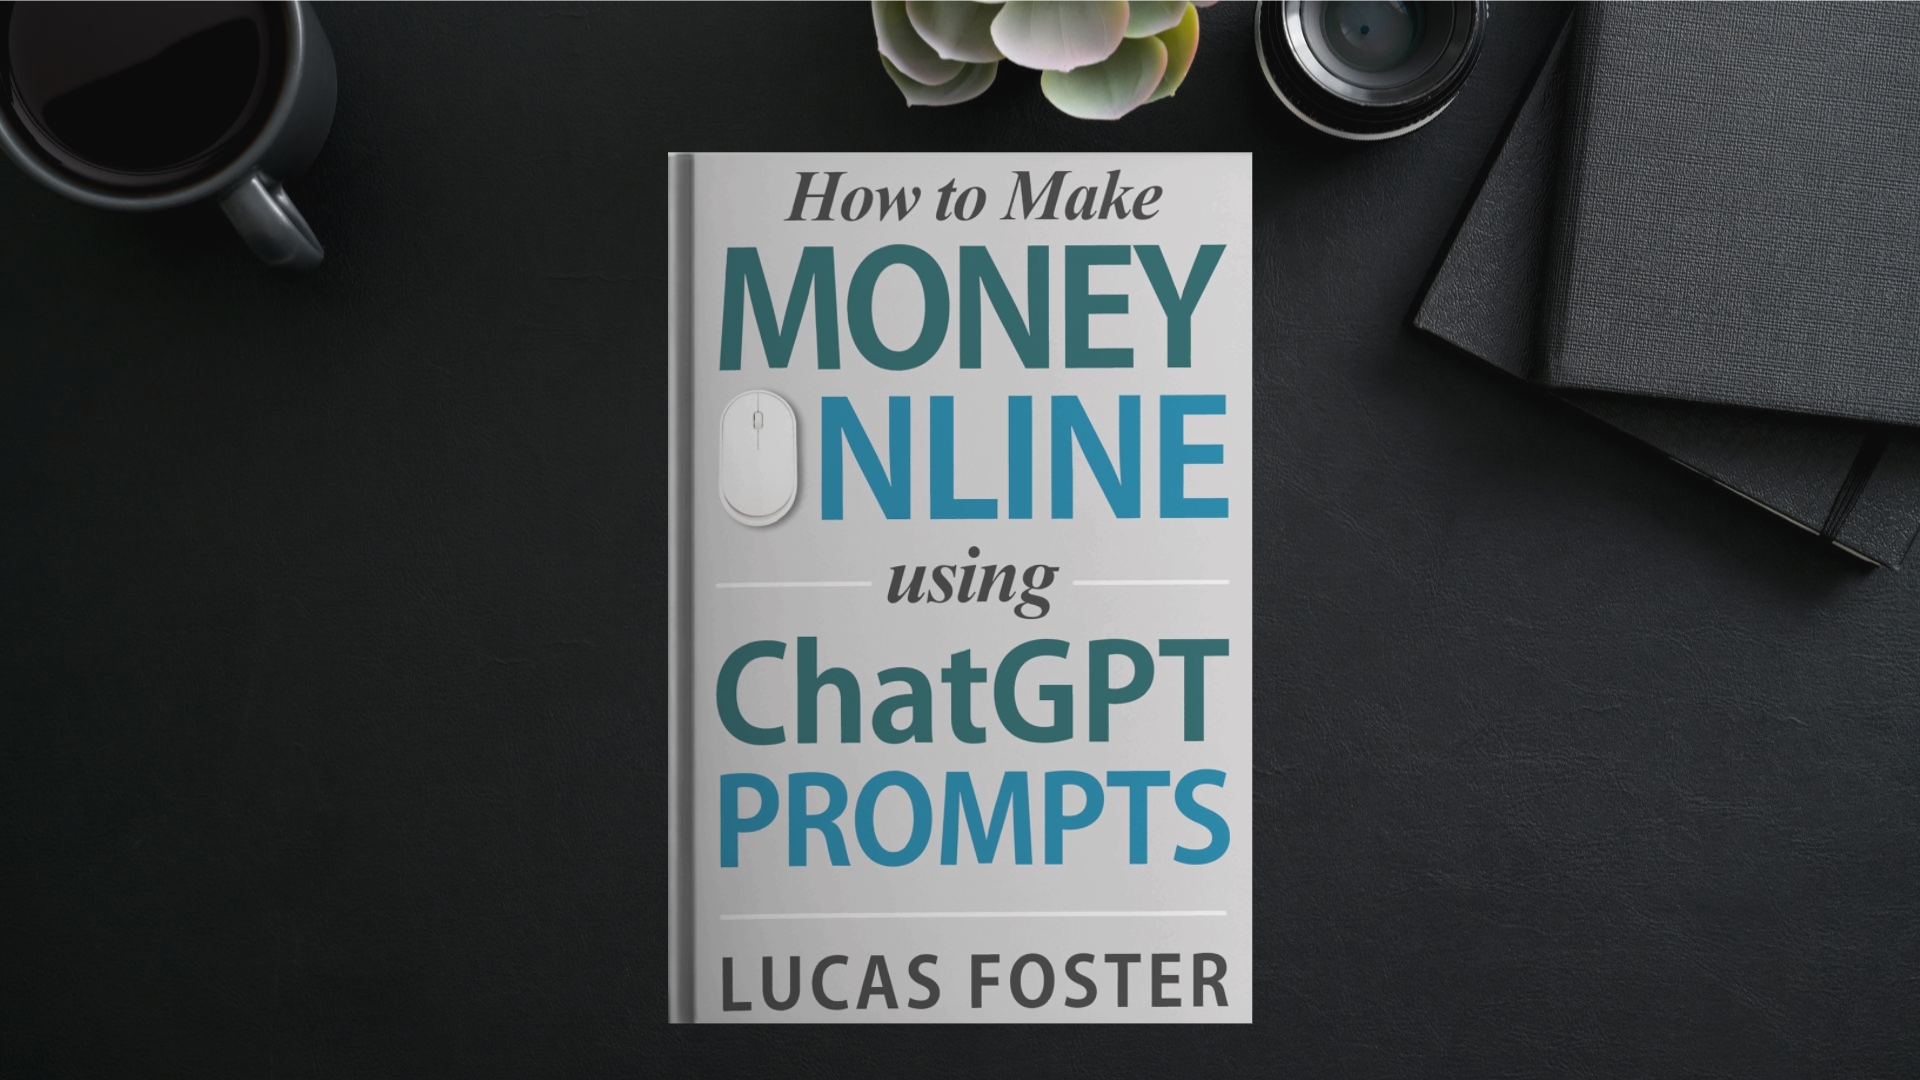 how to make money using chatgpt prompts book